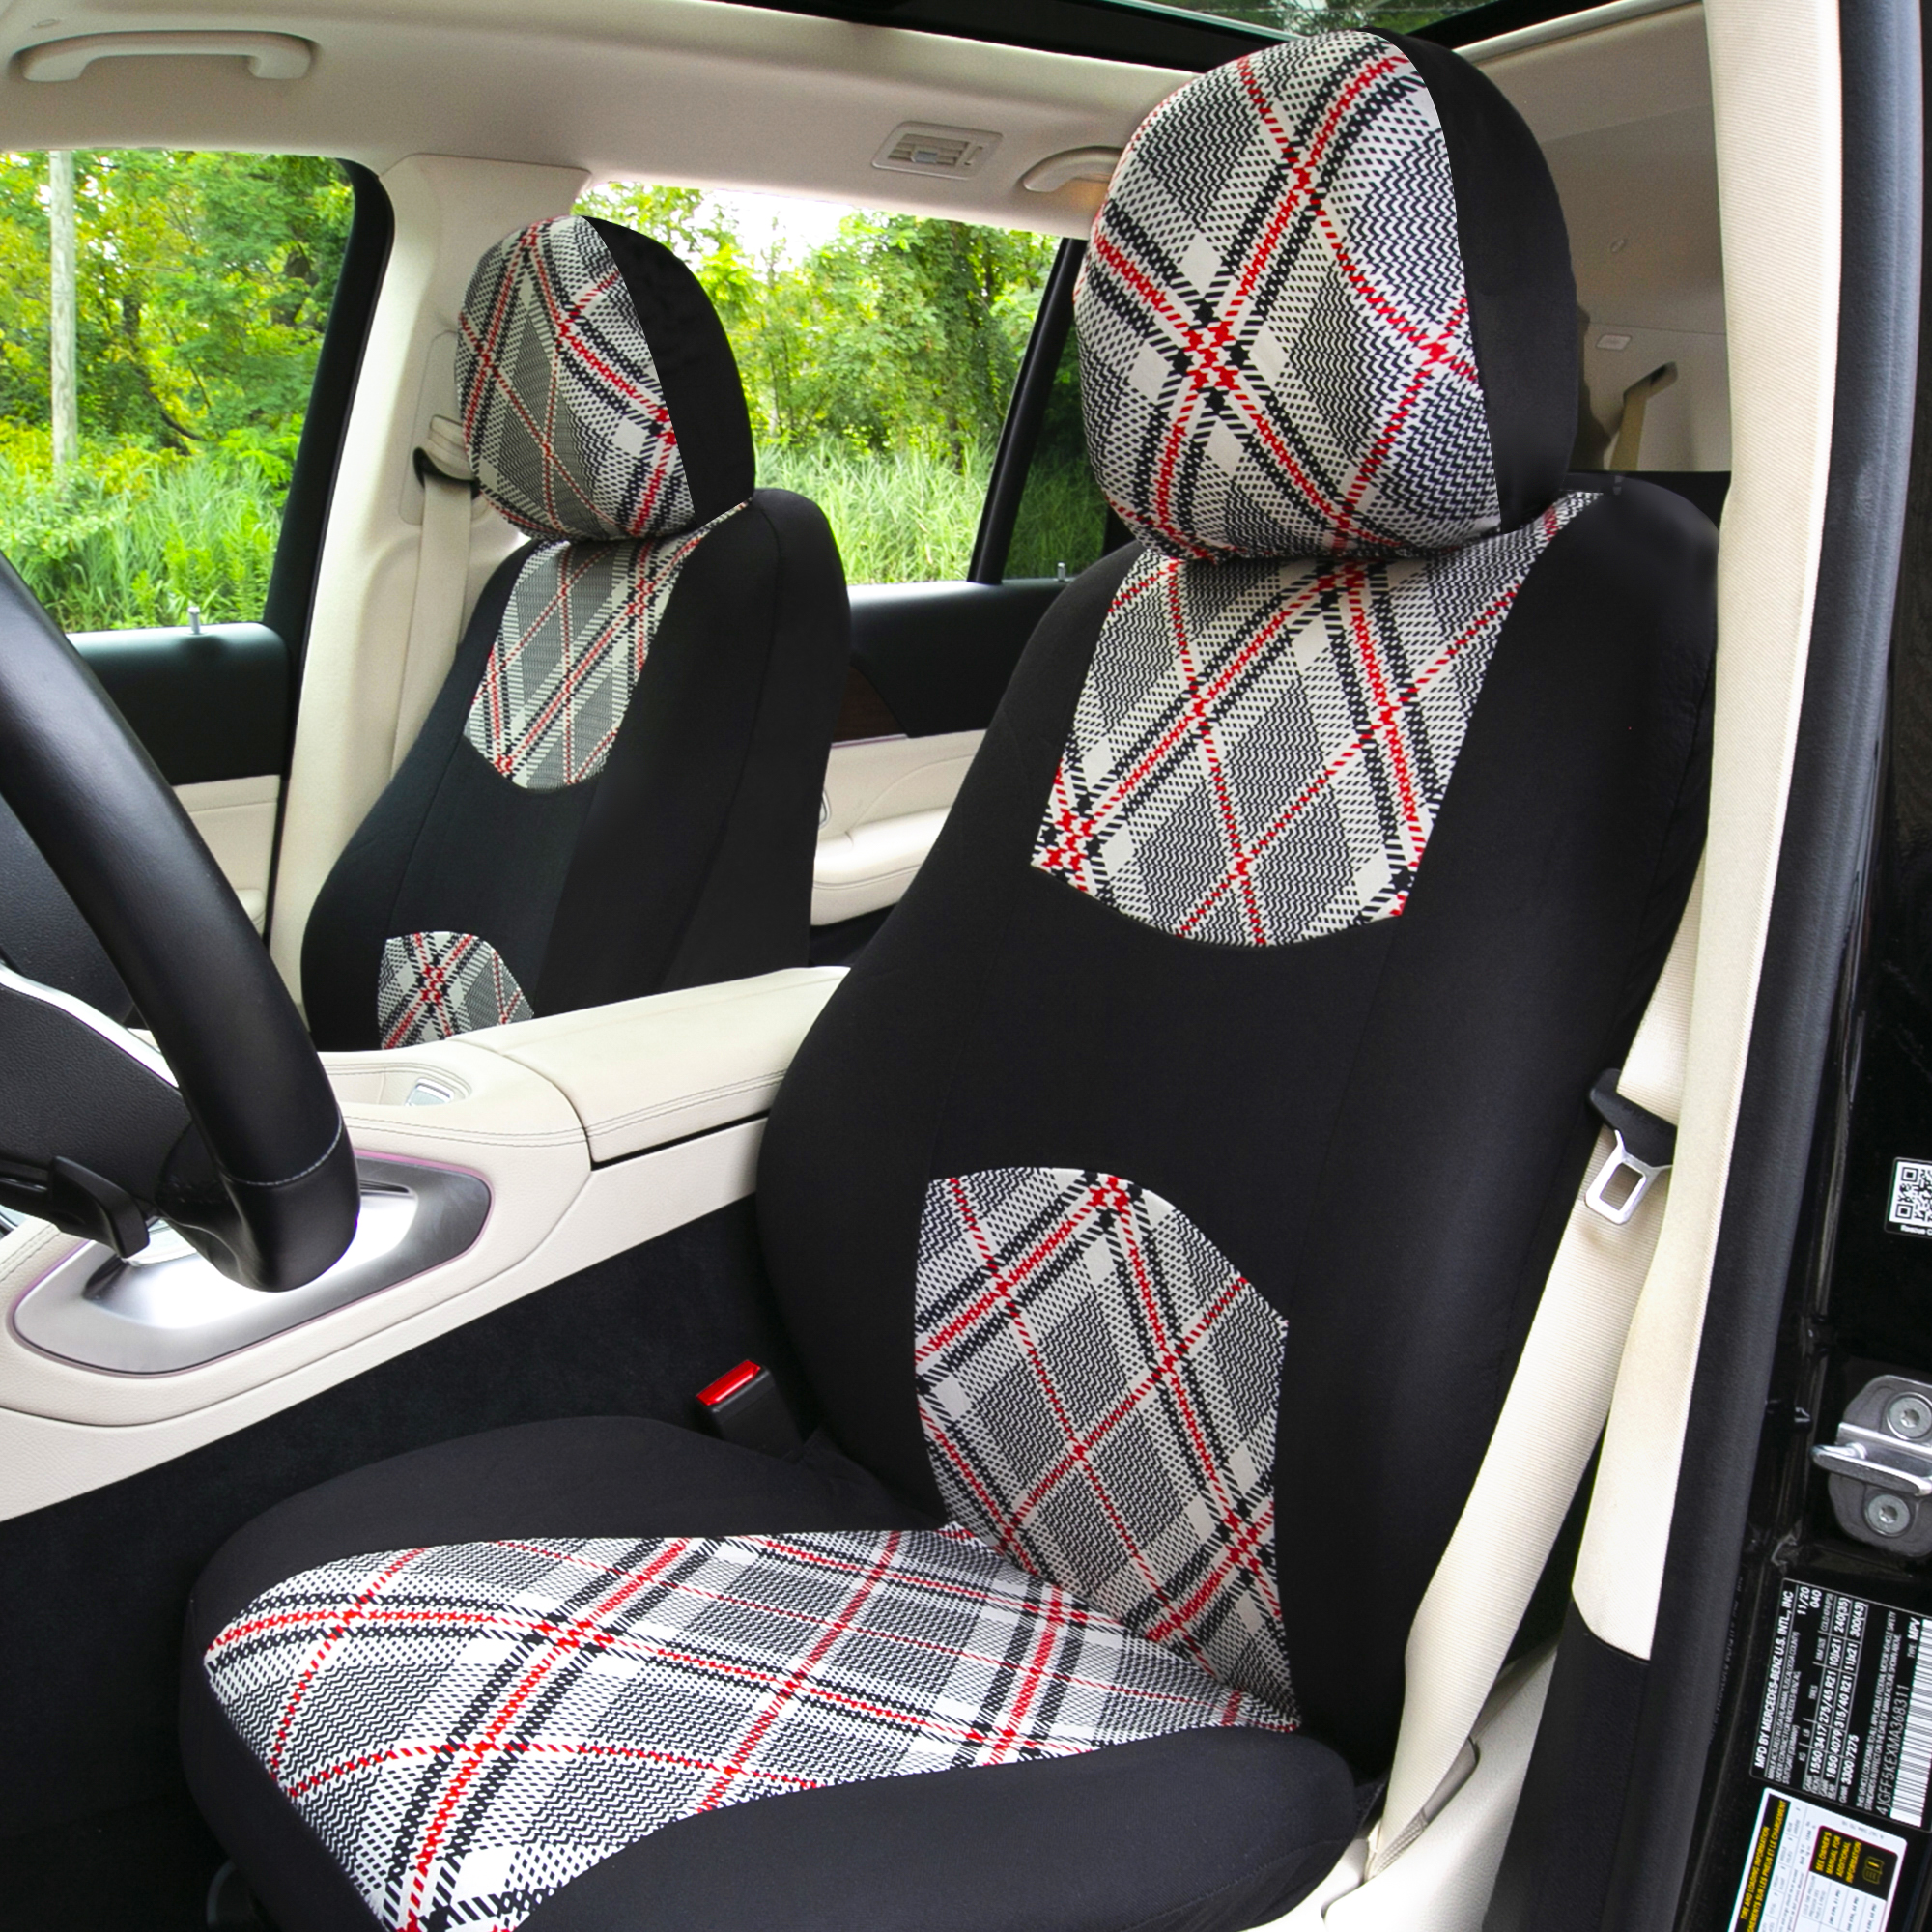 FH Group Tartan57 Plaid Print Seat Covers Fit For Car Truck SUV Van – Combo Full Set